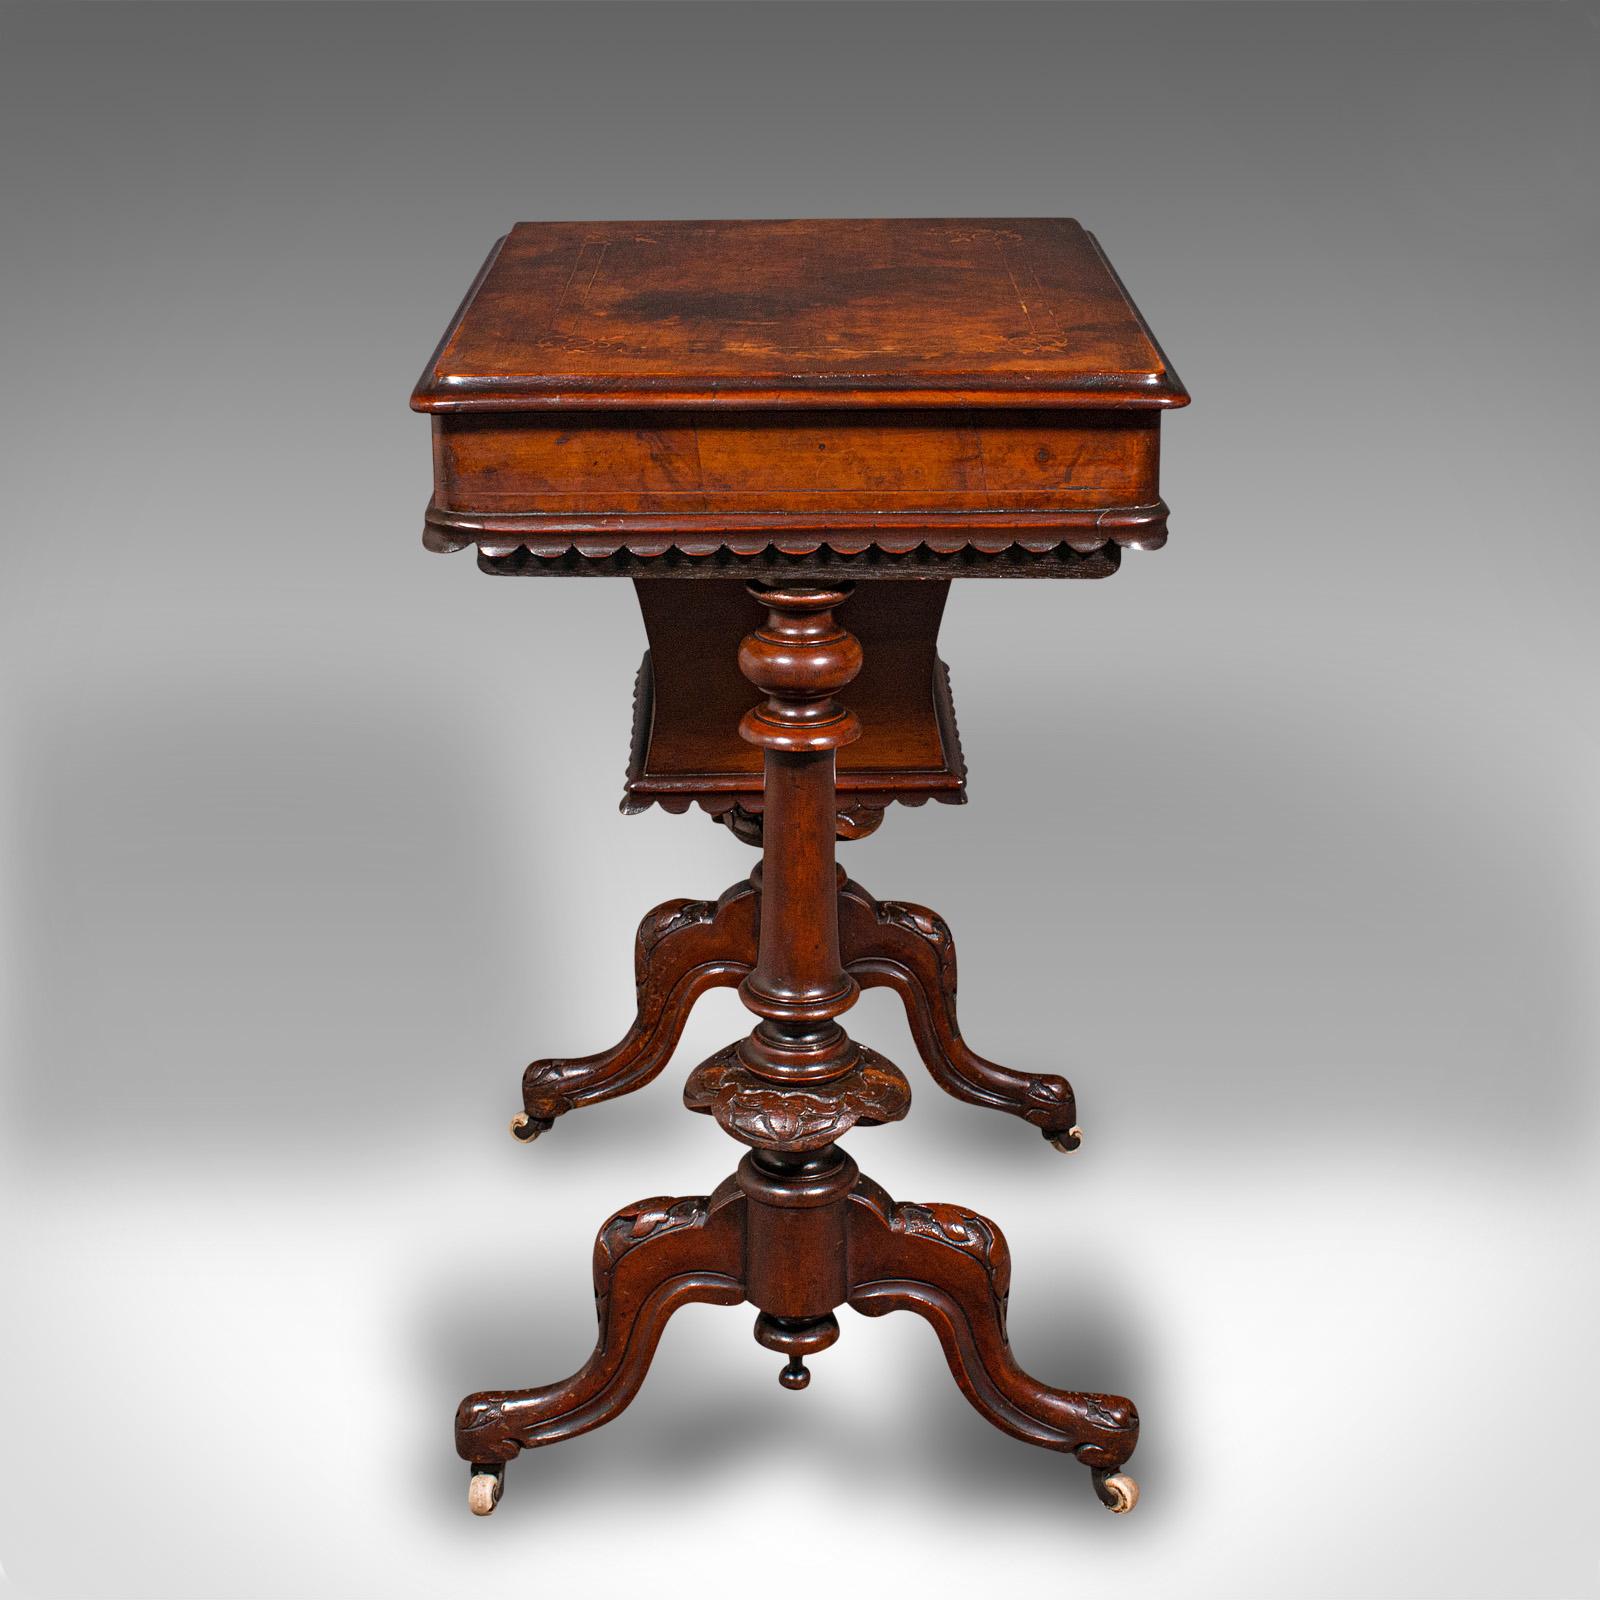 Antique Ladies Work Table, English, Burr Walnut, Sewing Table, Victorian, C.1850 In Good Condition For Sale In Hele, Devon, GB